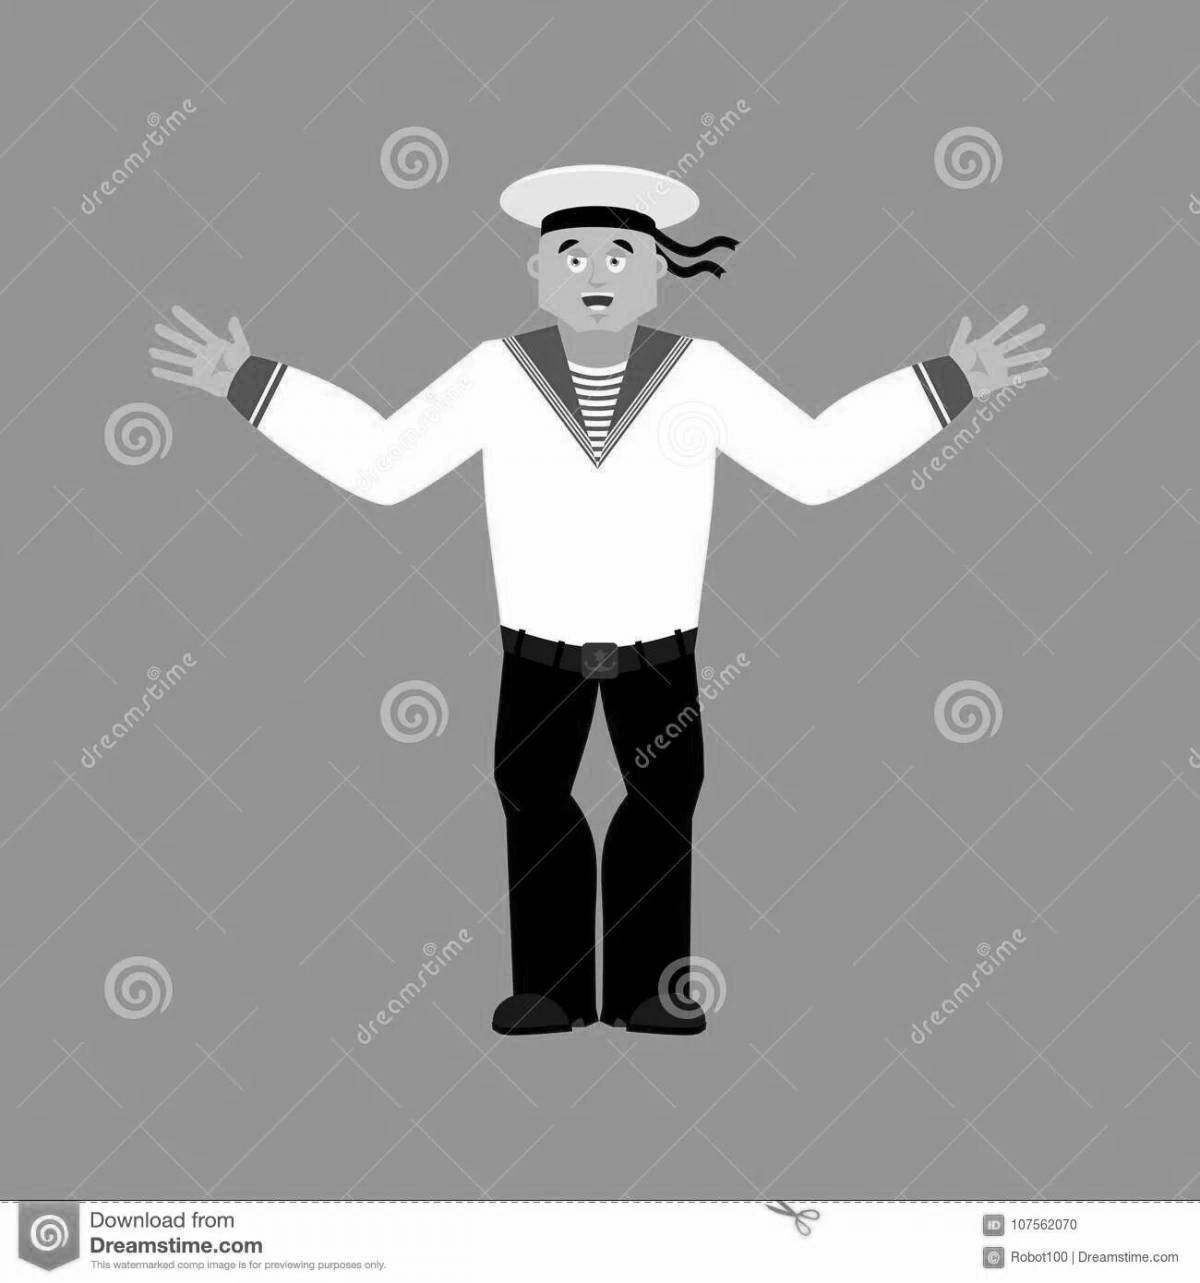 Luminous coloring sailor with signal flags